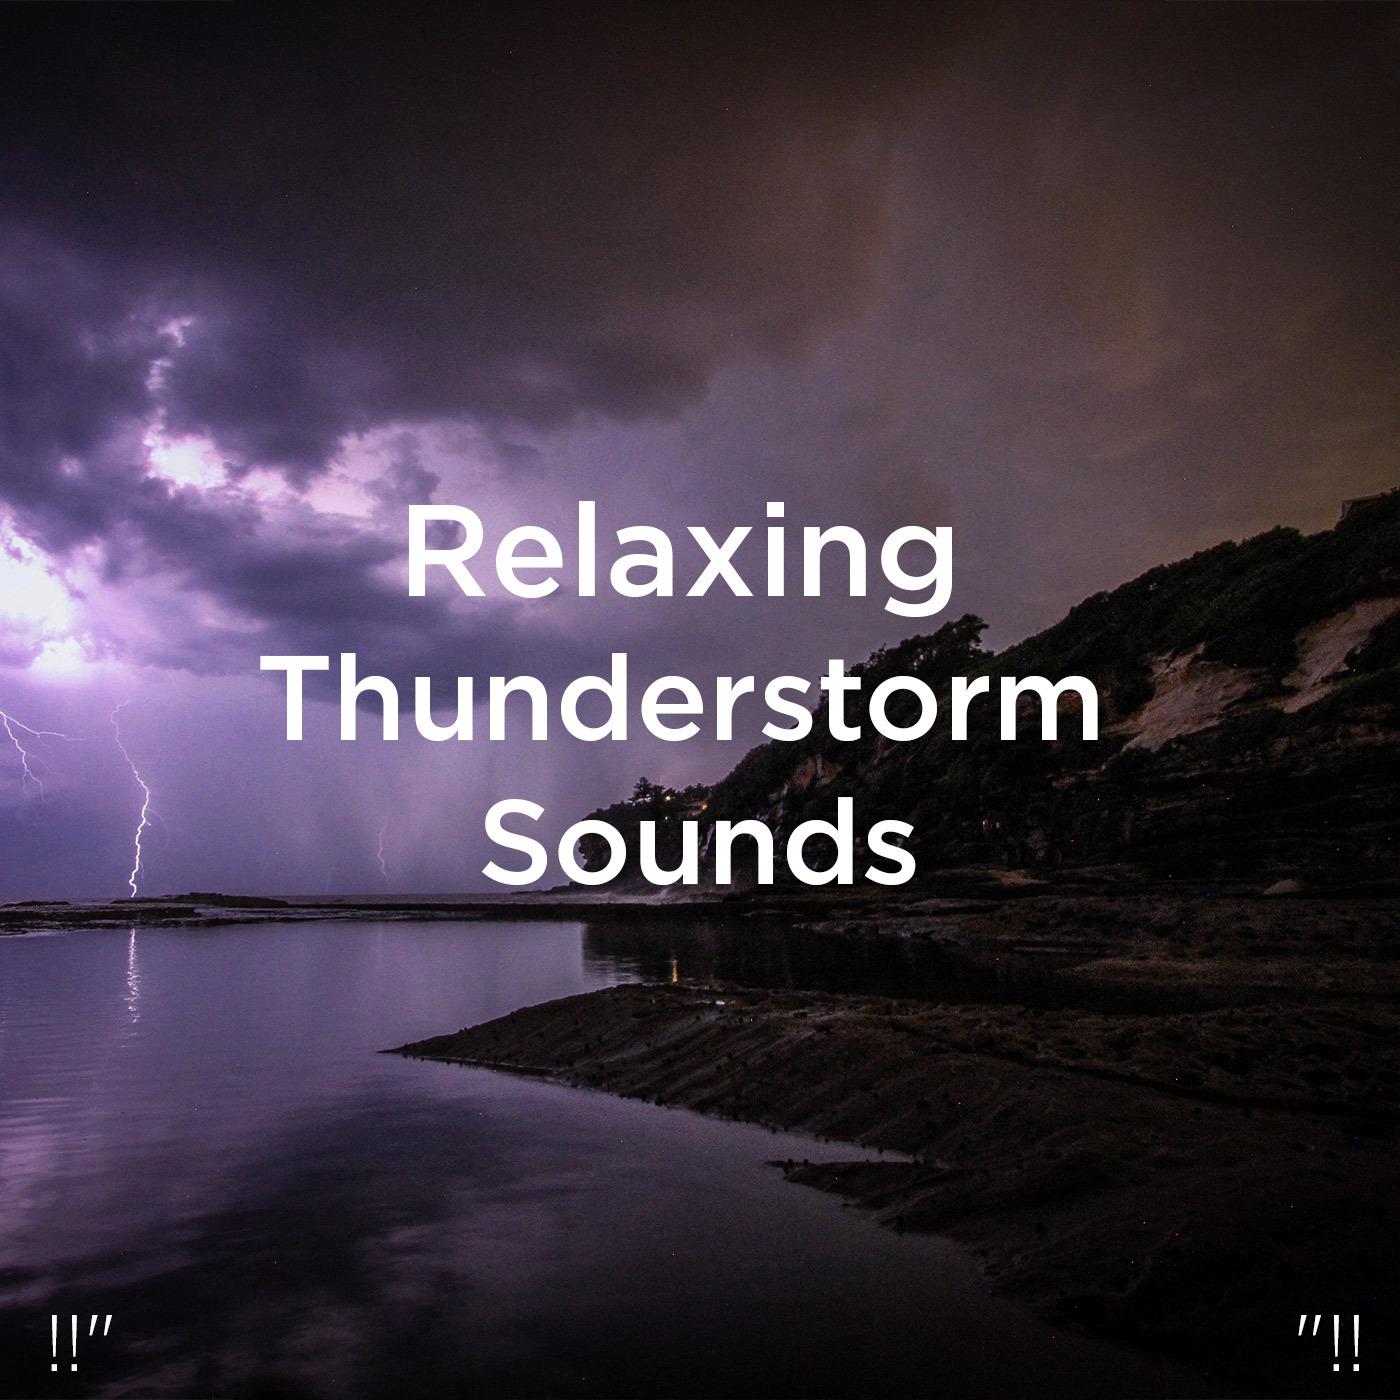 play thunderstorm sounds